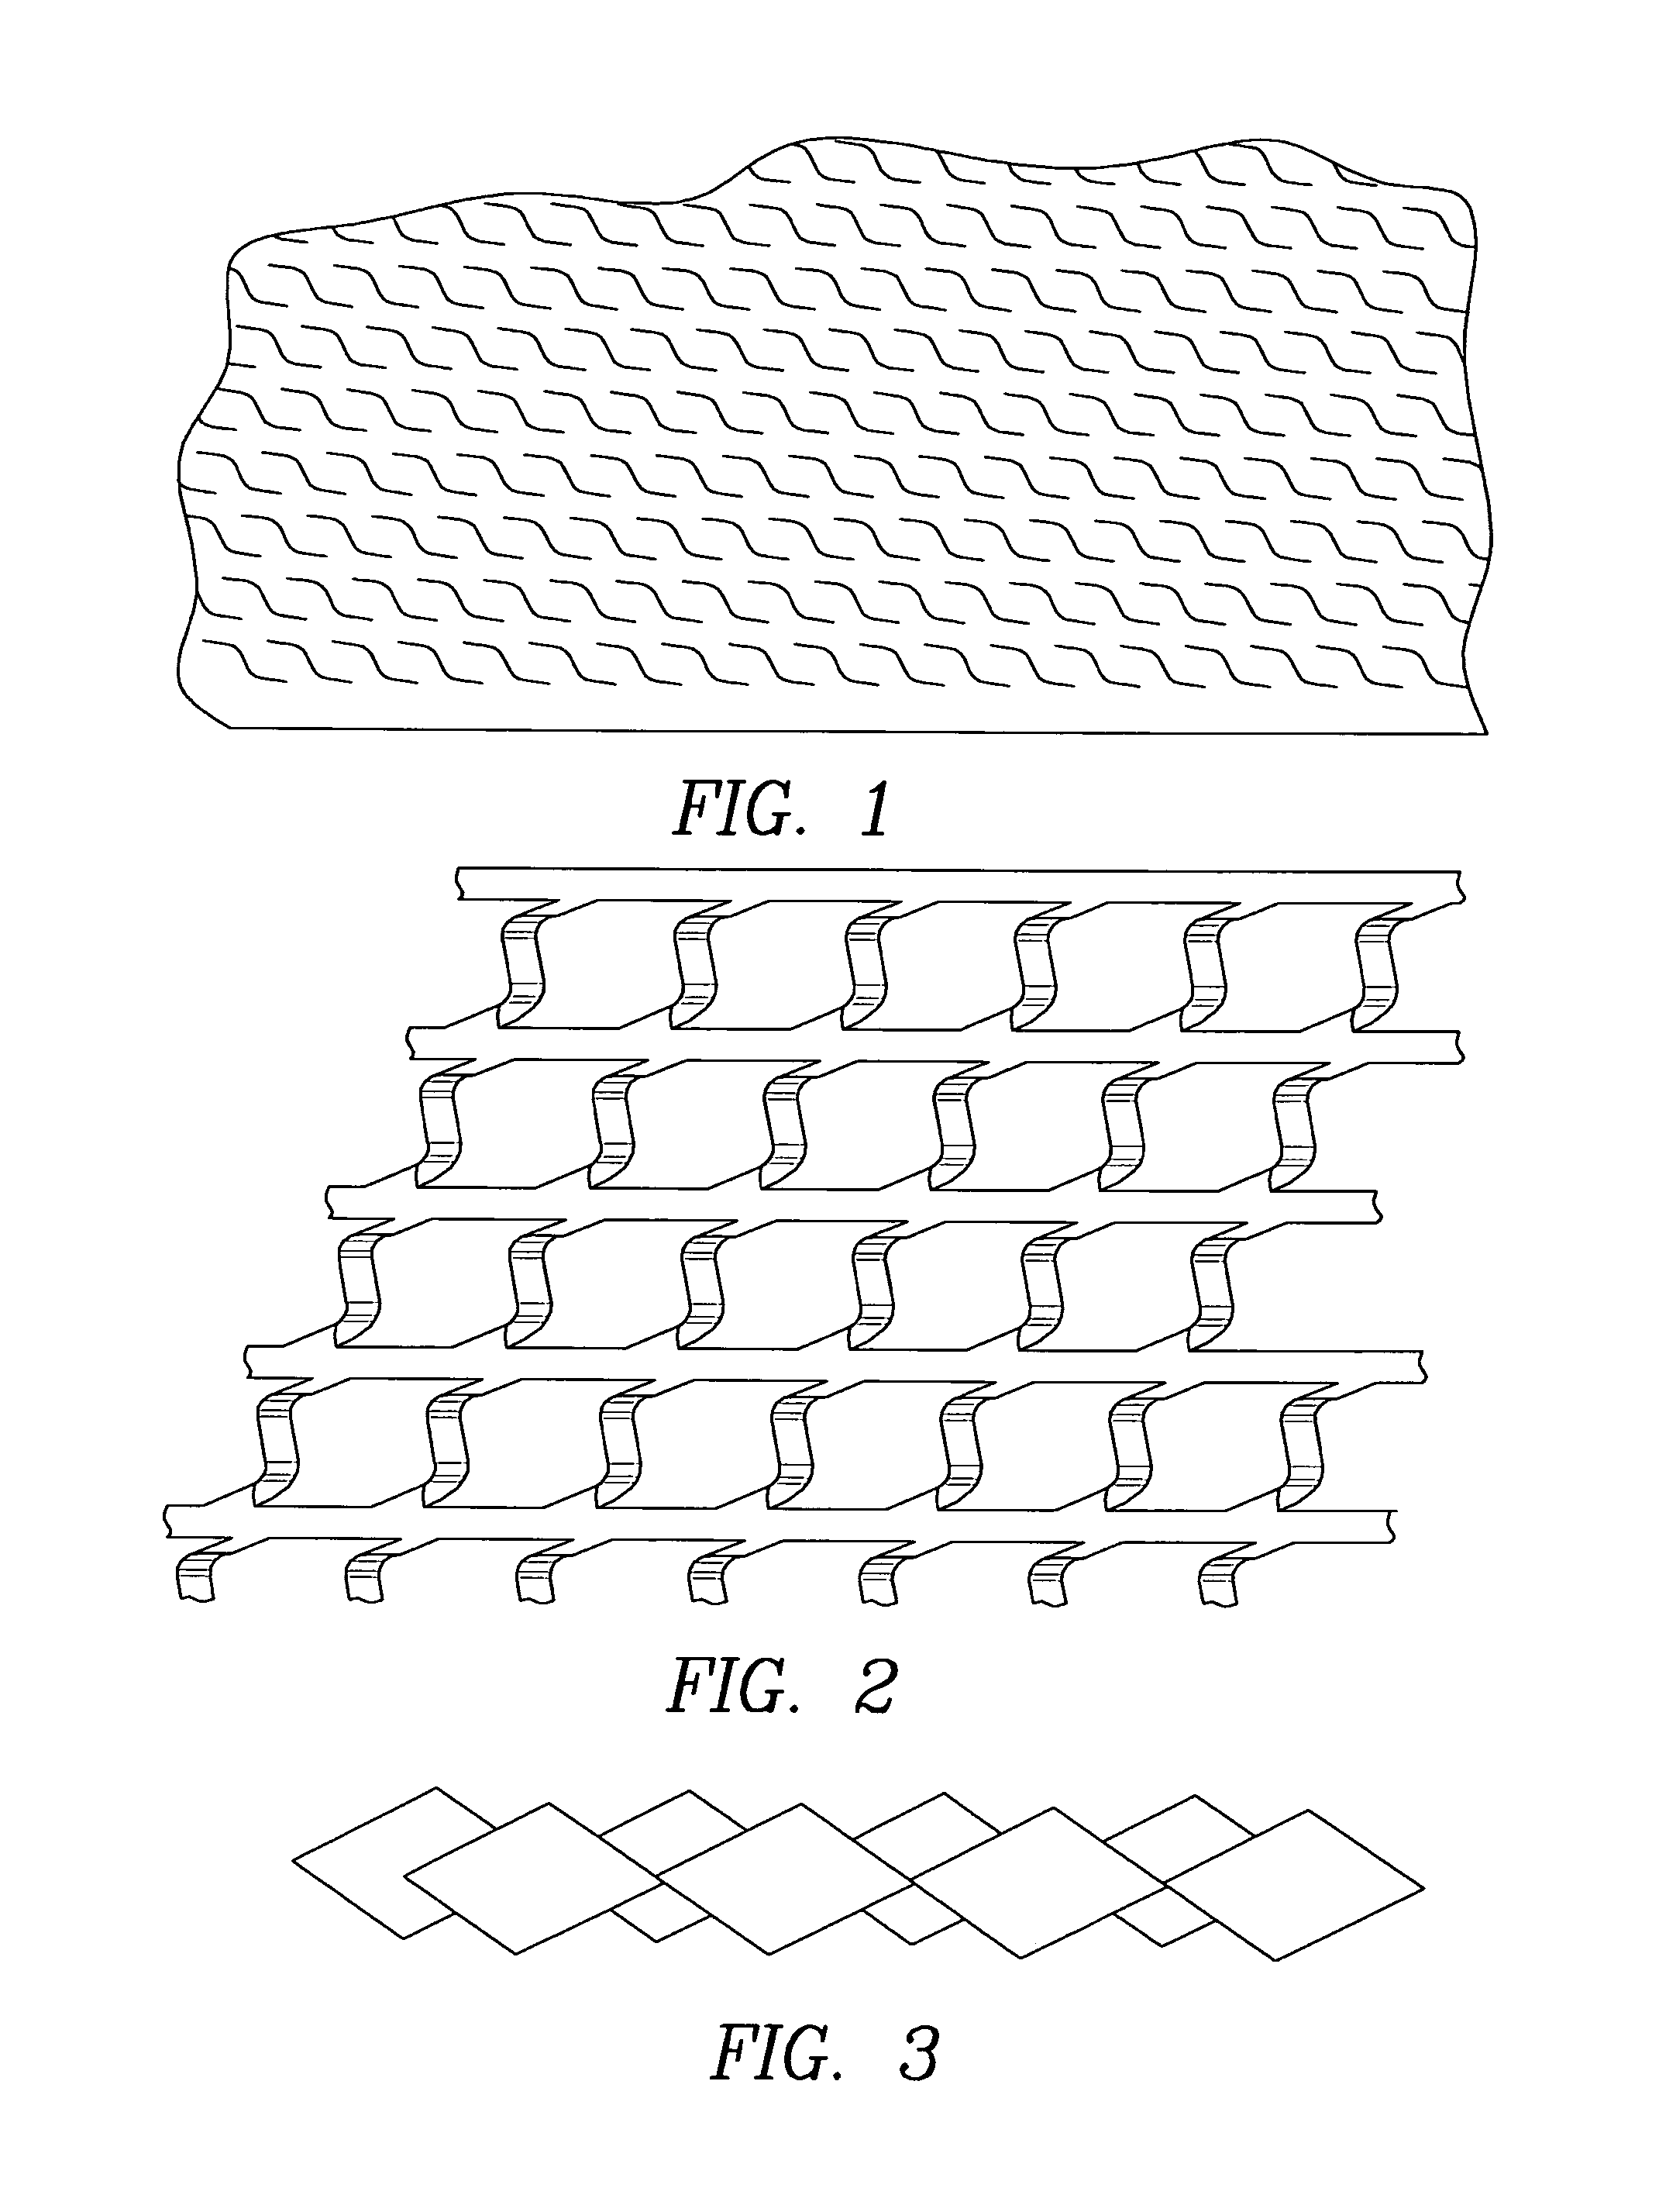 Apparatus to deploy and expand web material